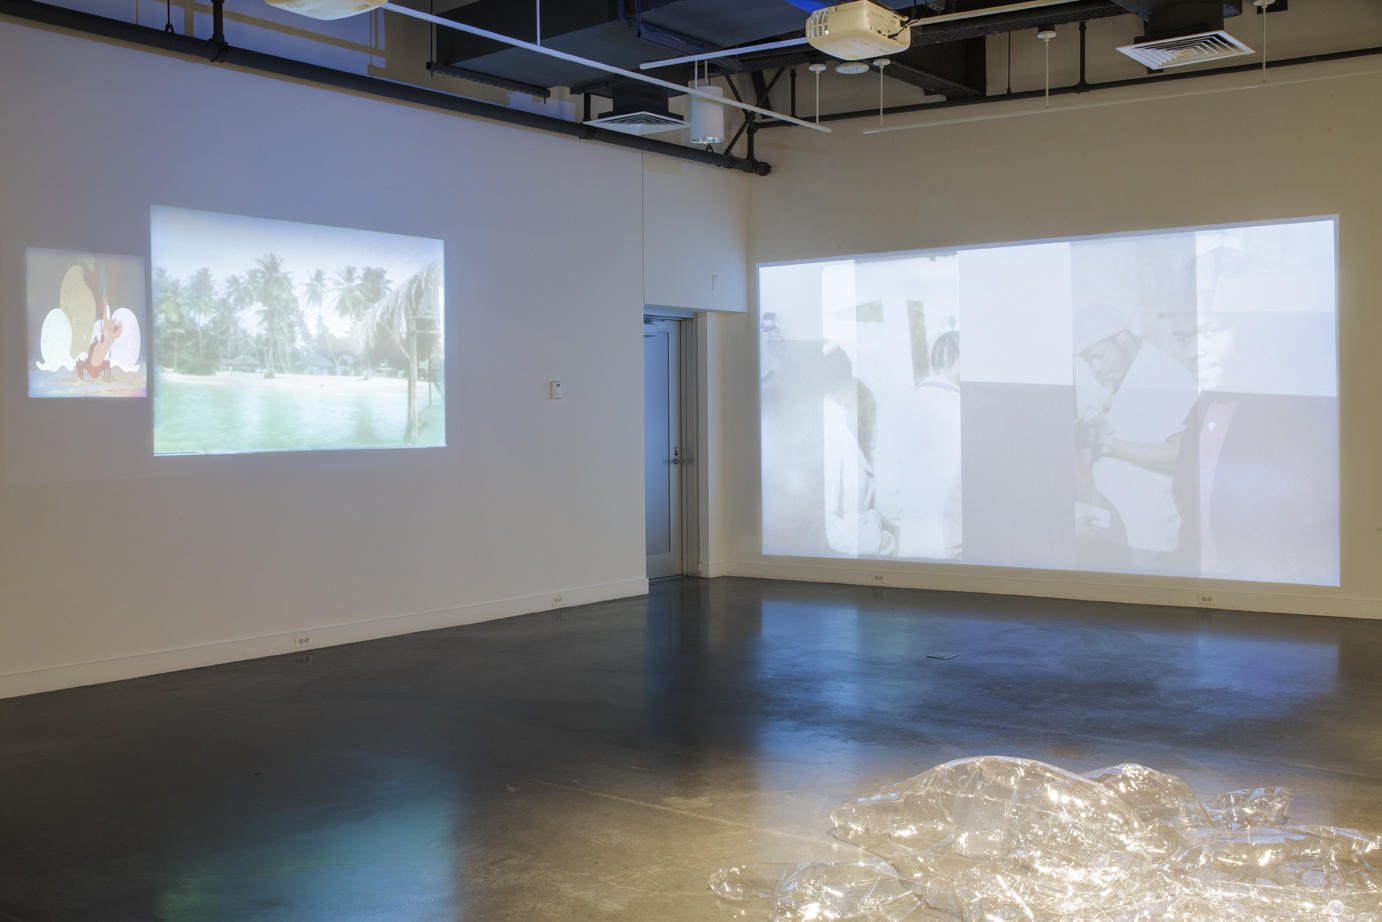 gallery interior; two walls display faintly projected images